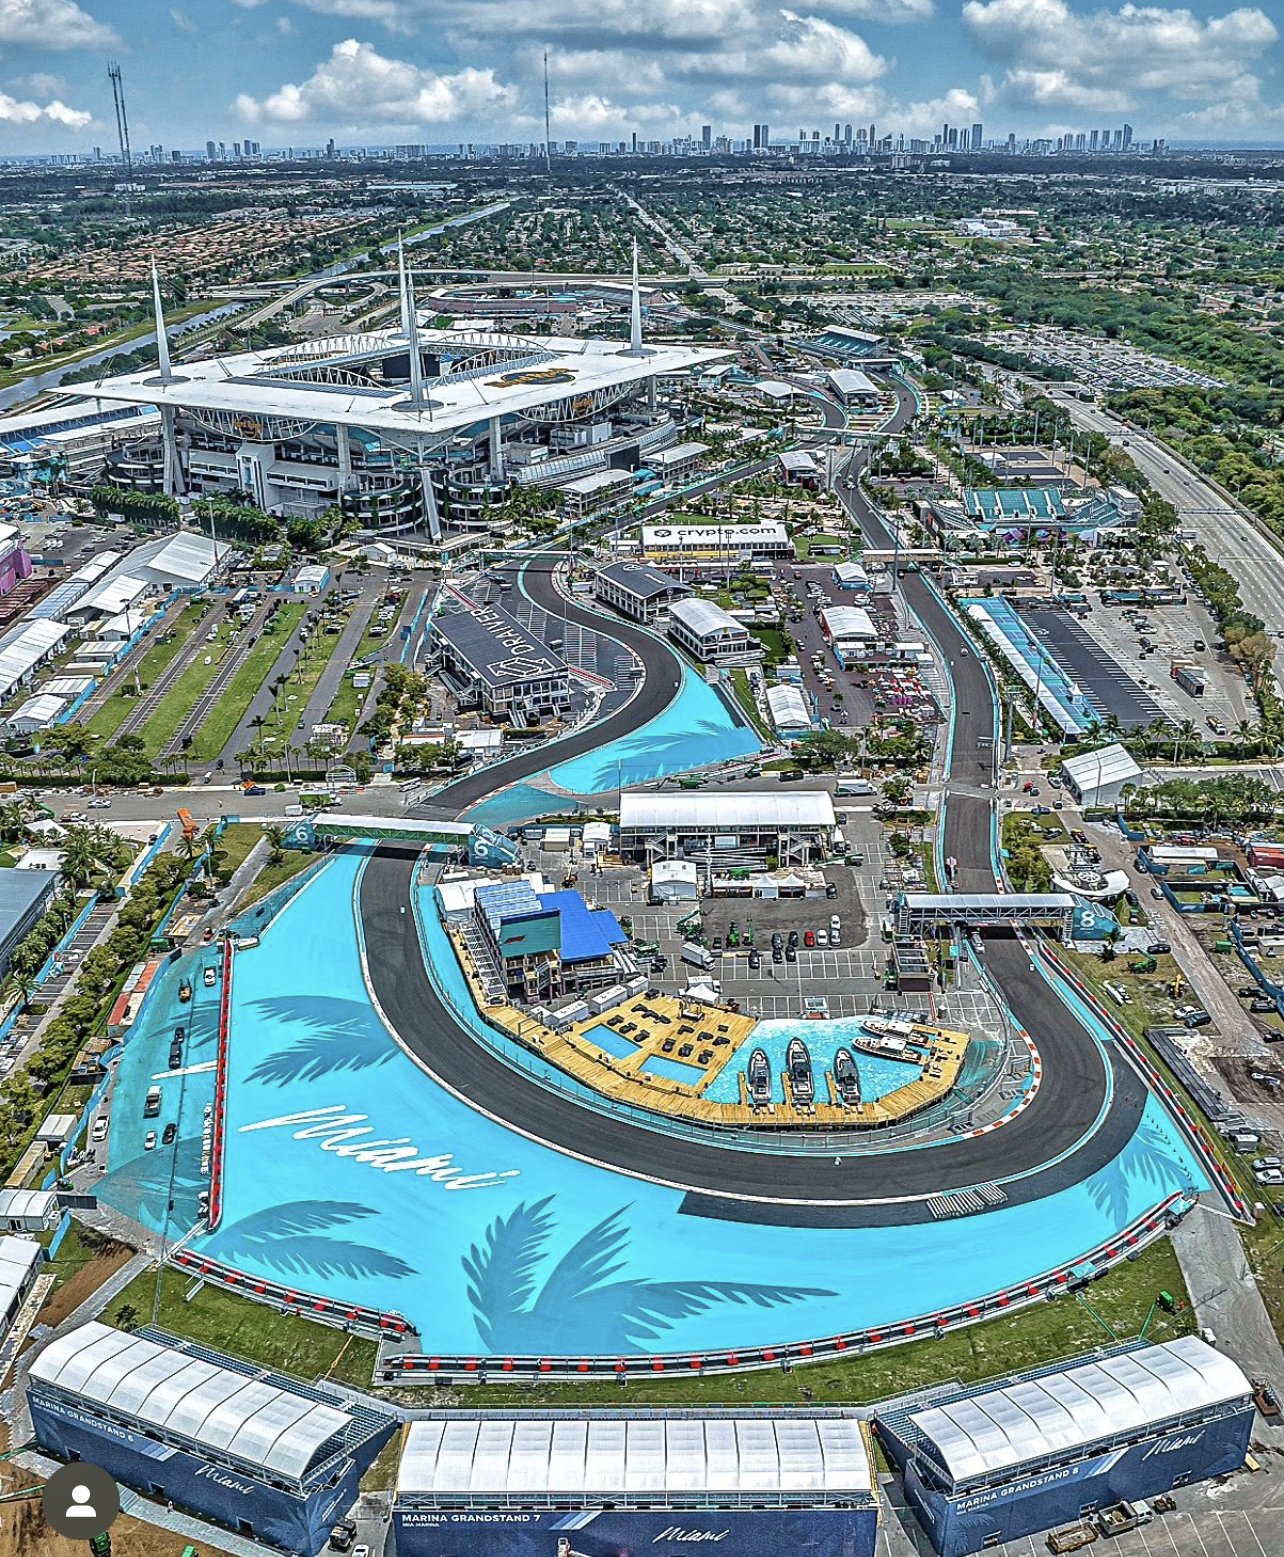 Rev Up Your Engines 5 Hotels to Experience the F1 Grand Prix in Miami — Hospitality Mentor